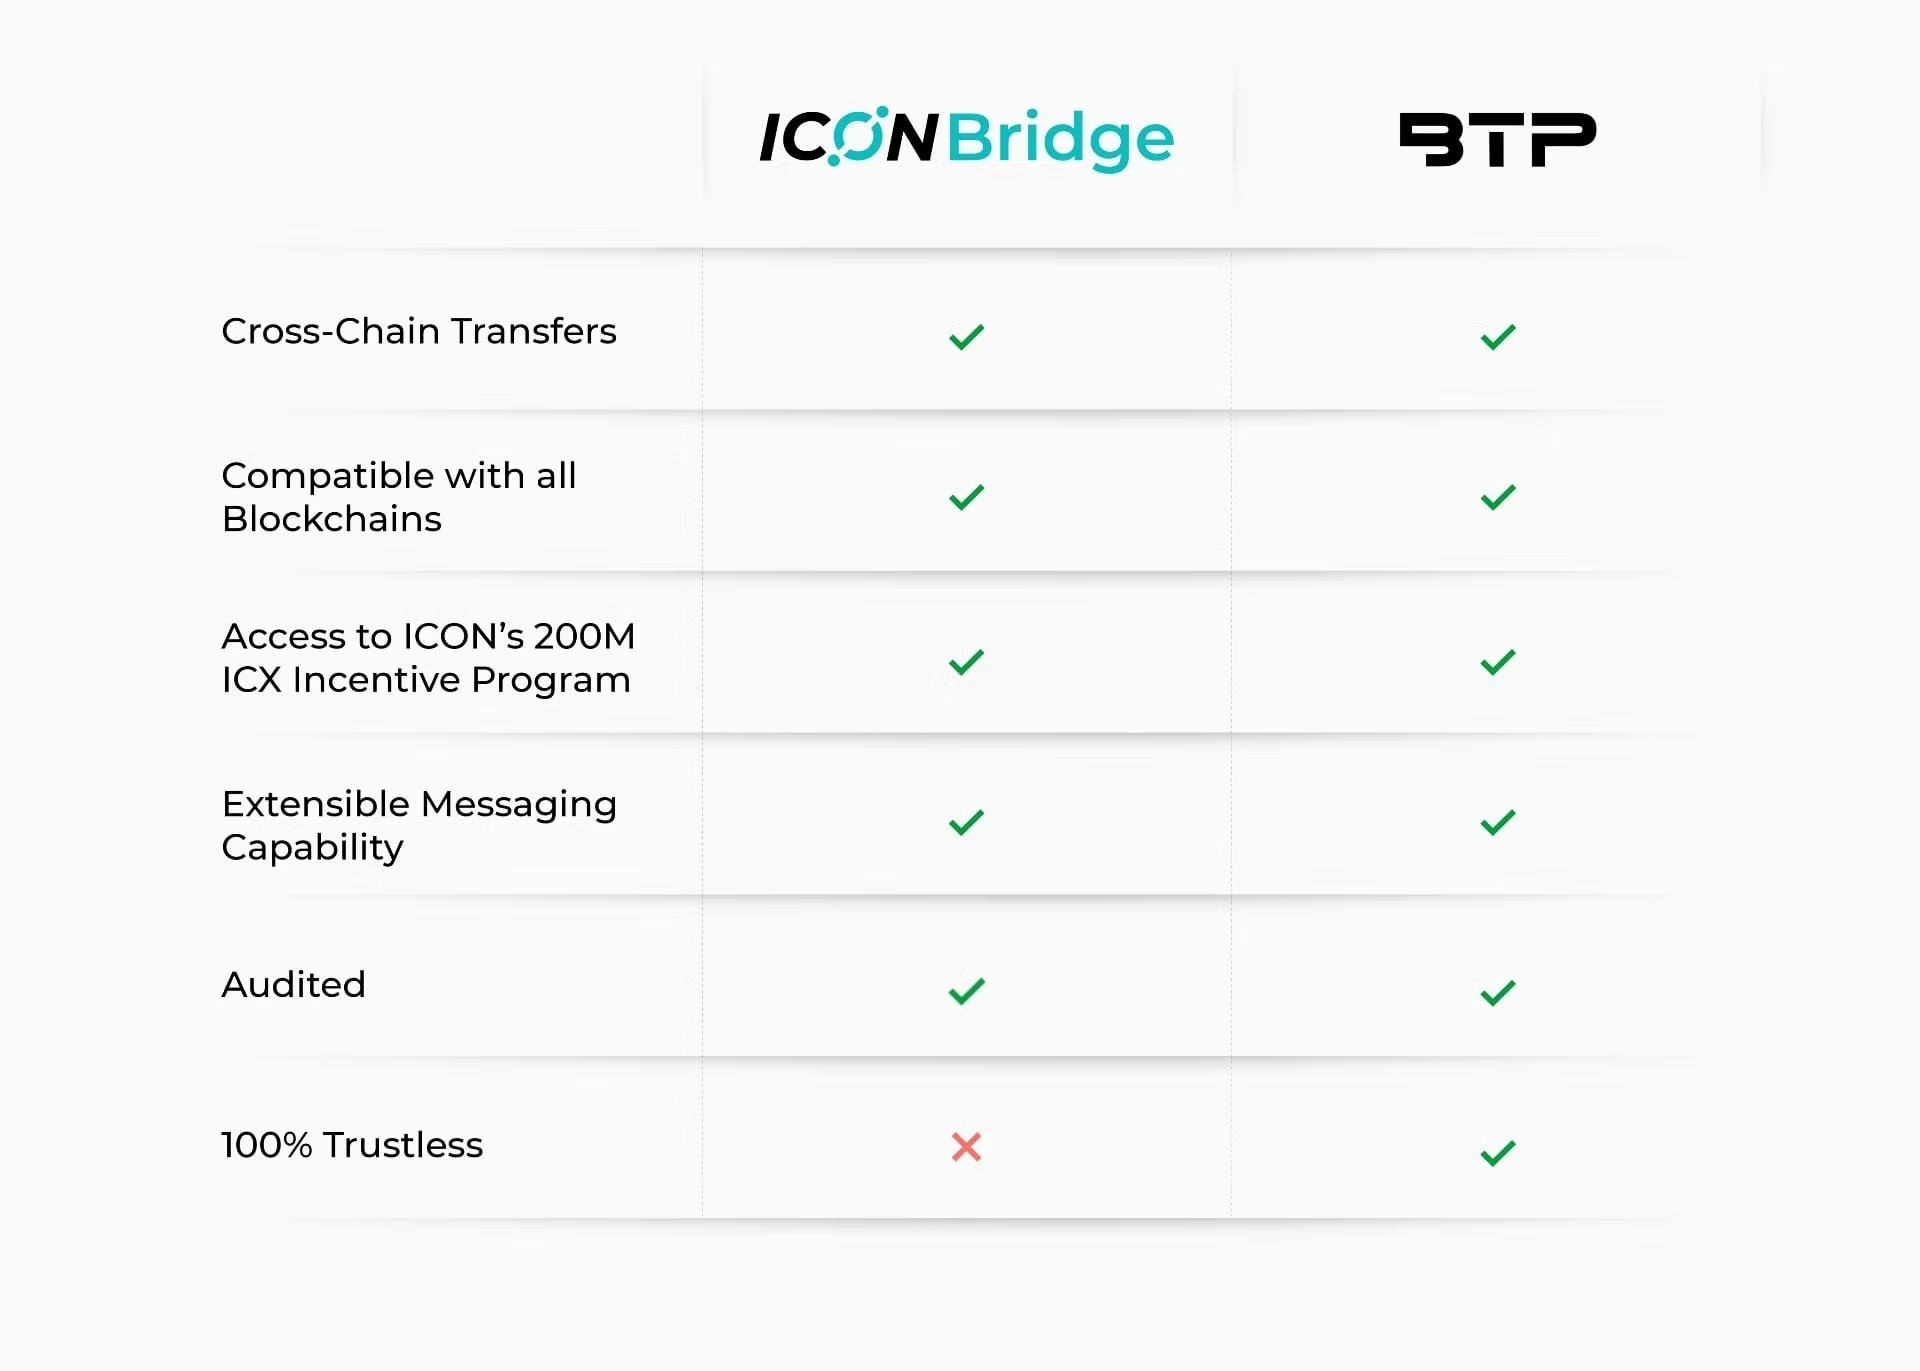 A comparison chart showcasing the differences between ICON Bridge and BTP.